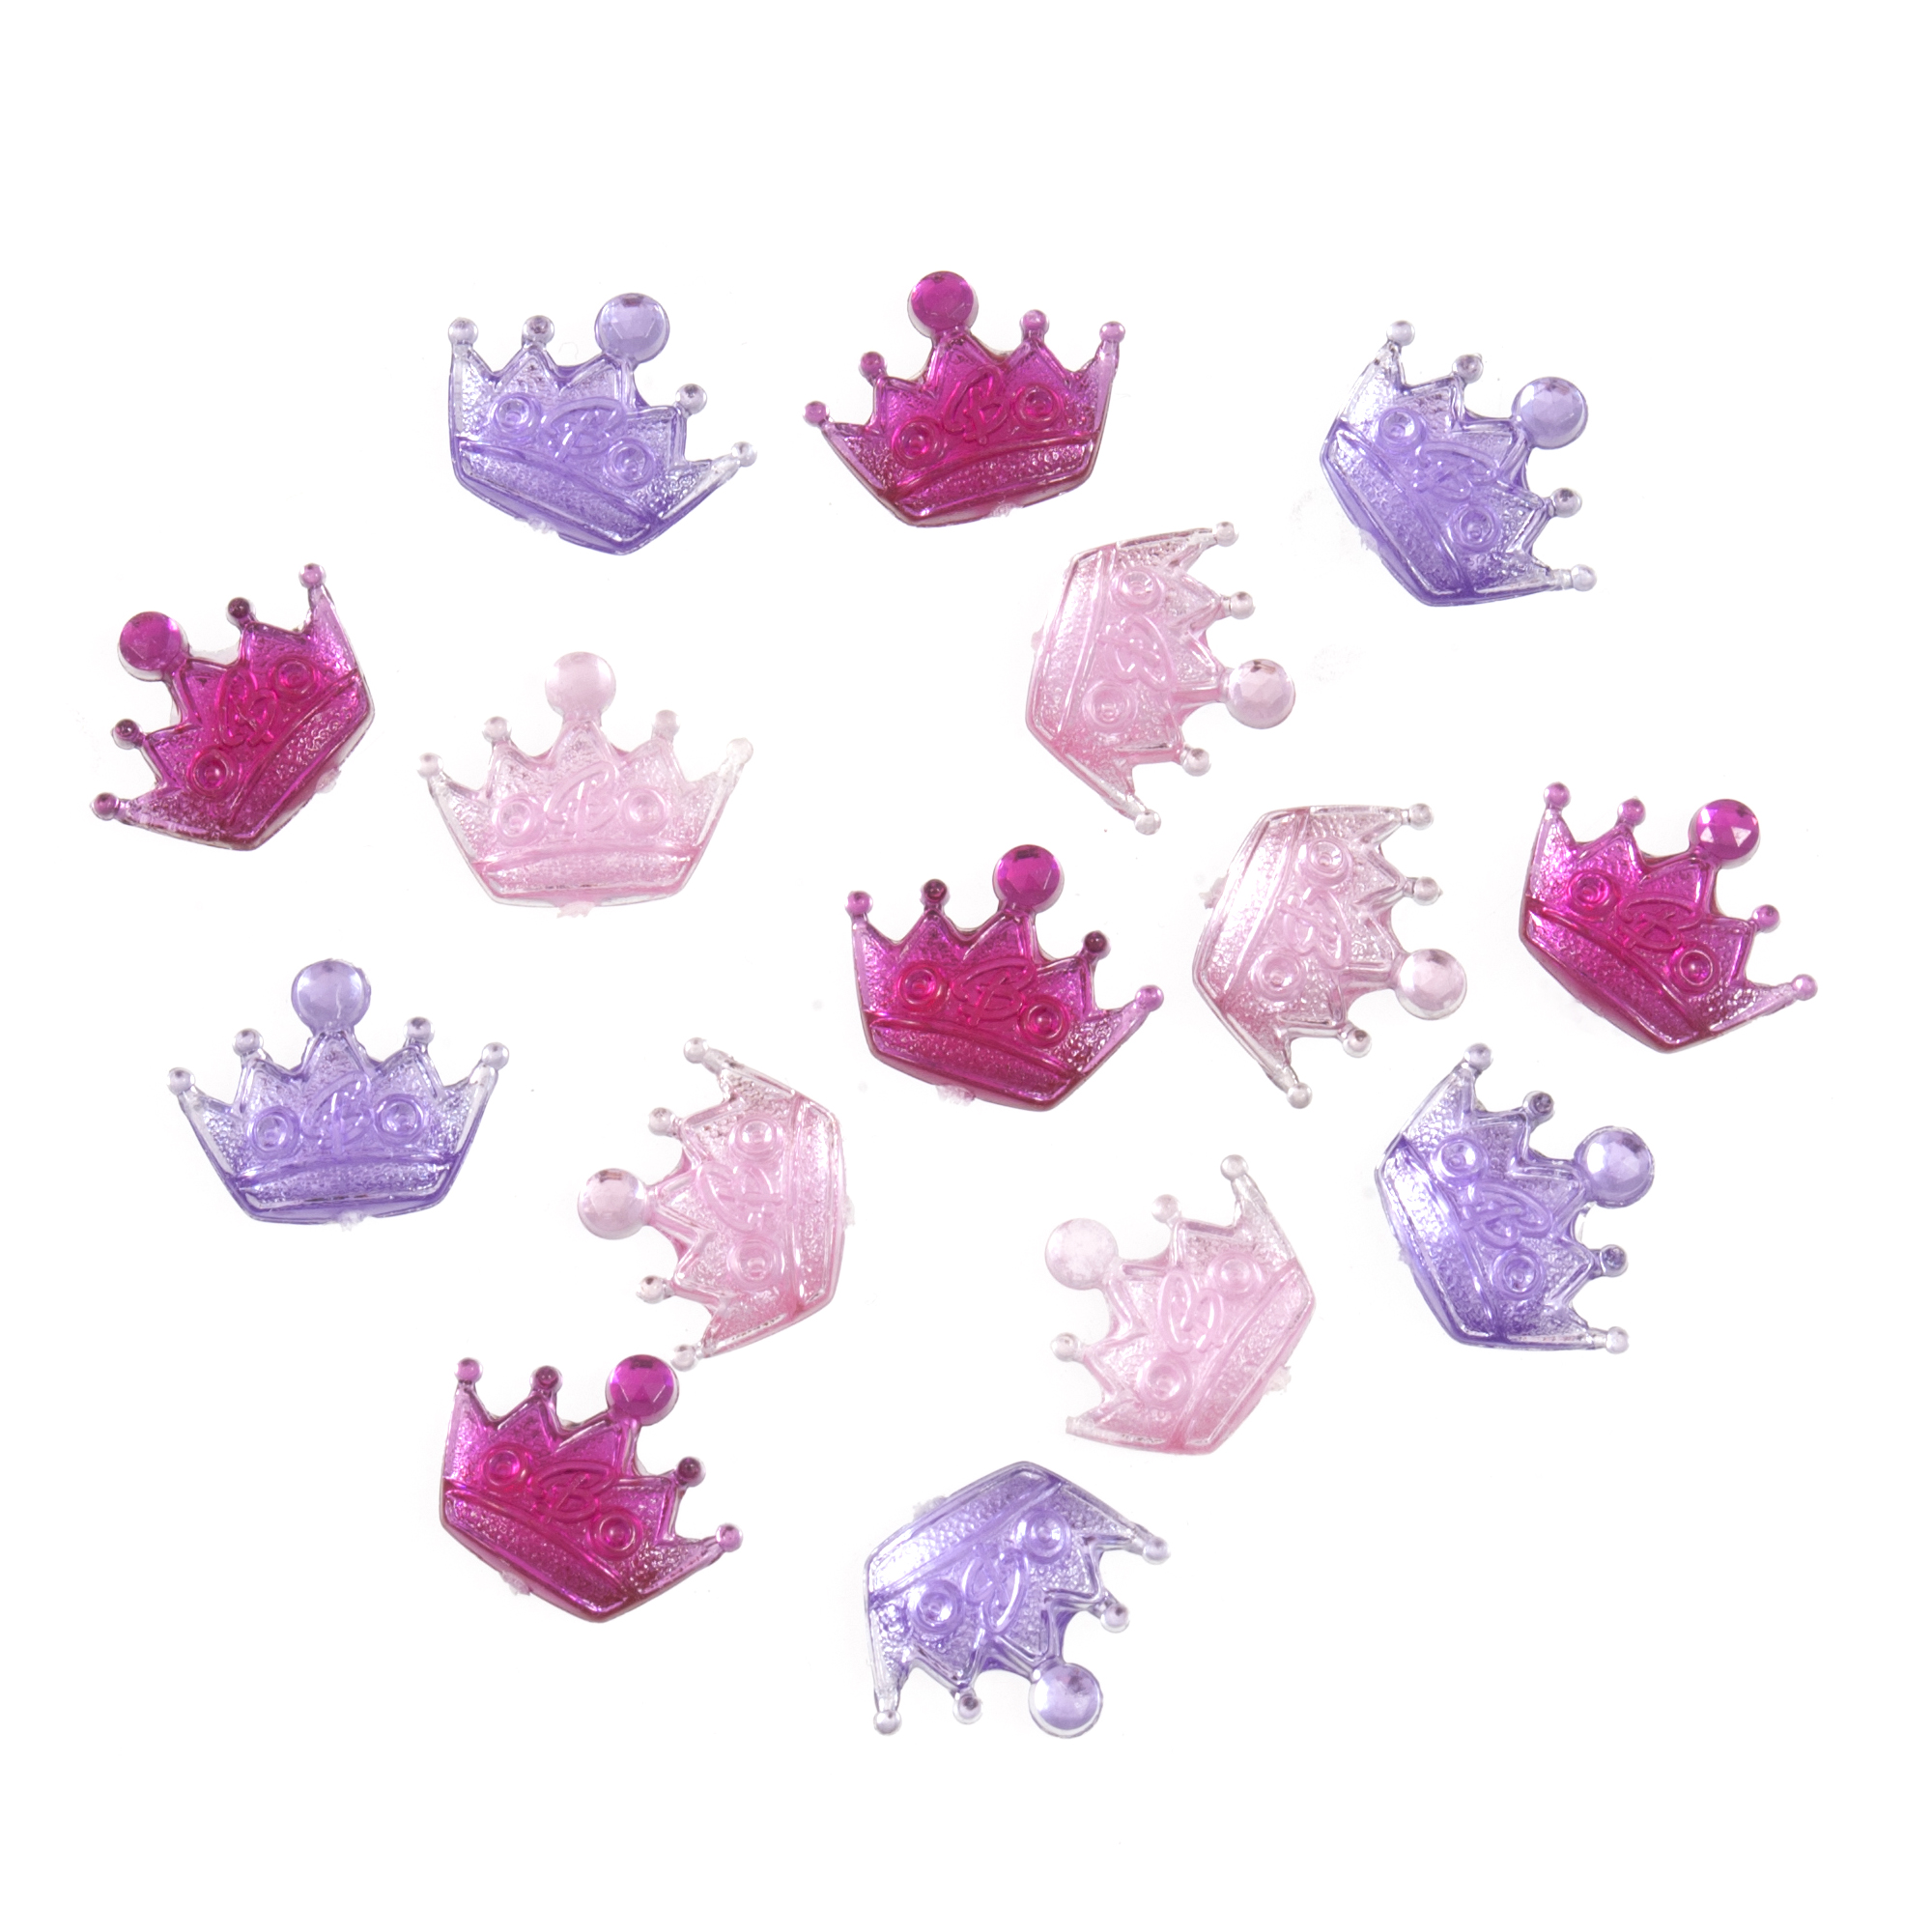 Picture of Craft Embellishments: Jewel Crowns: Pack of 30